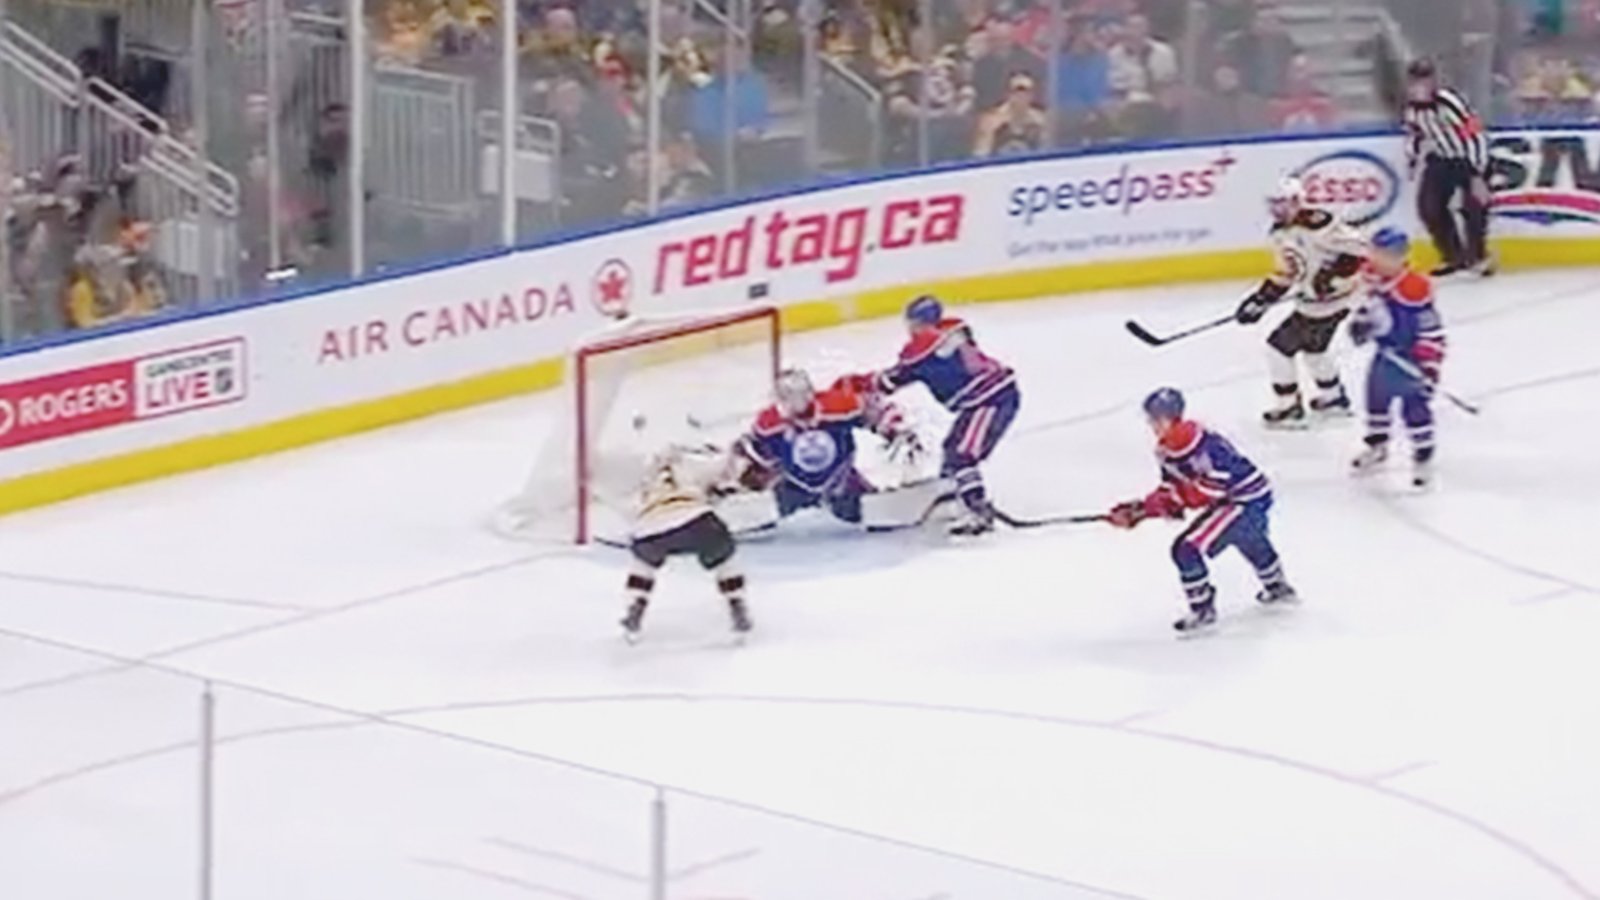 Must see: Marchand's 37th goal of the year is another beauty!